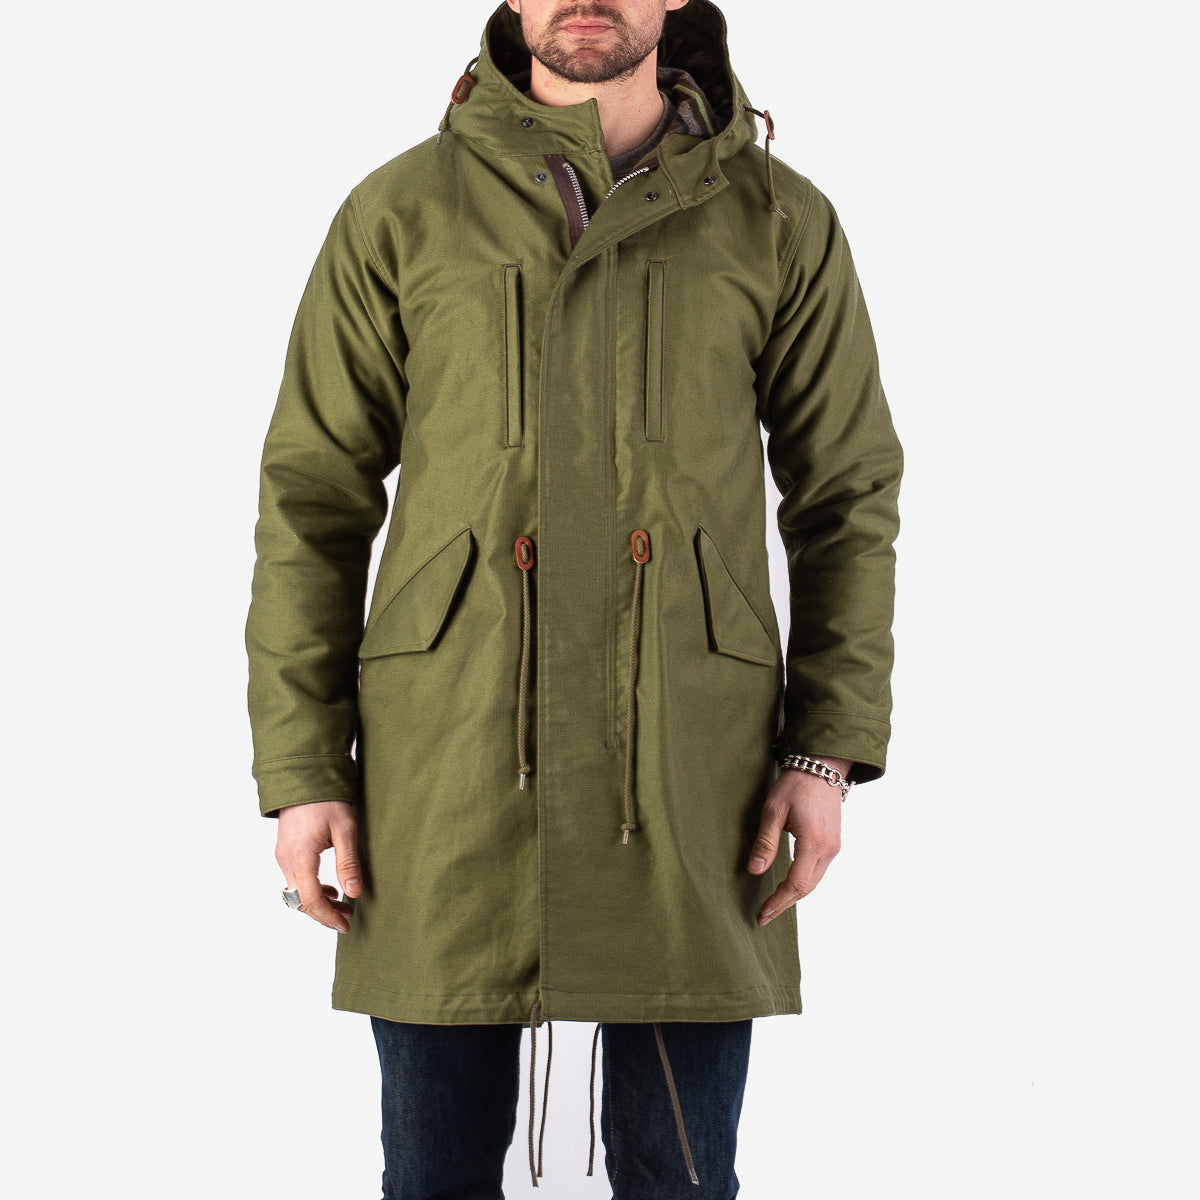 Iron Heart Whipcord M-51 Olive Coat Field IHM-34 – Drab